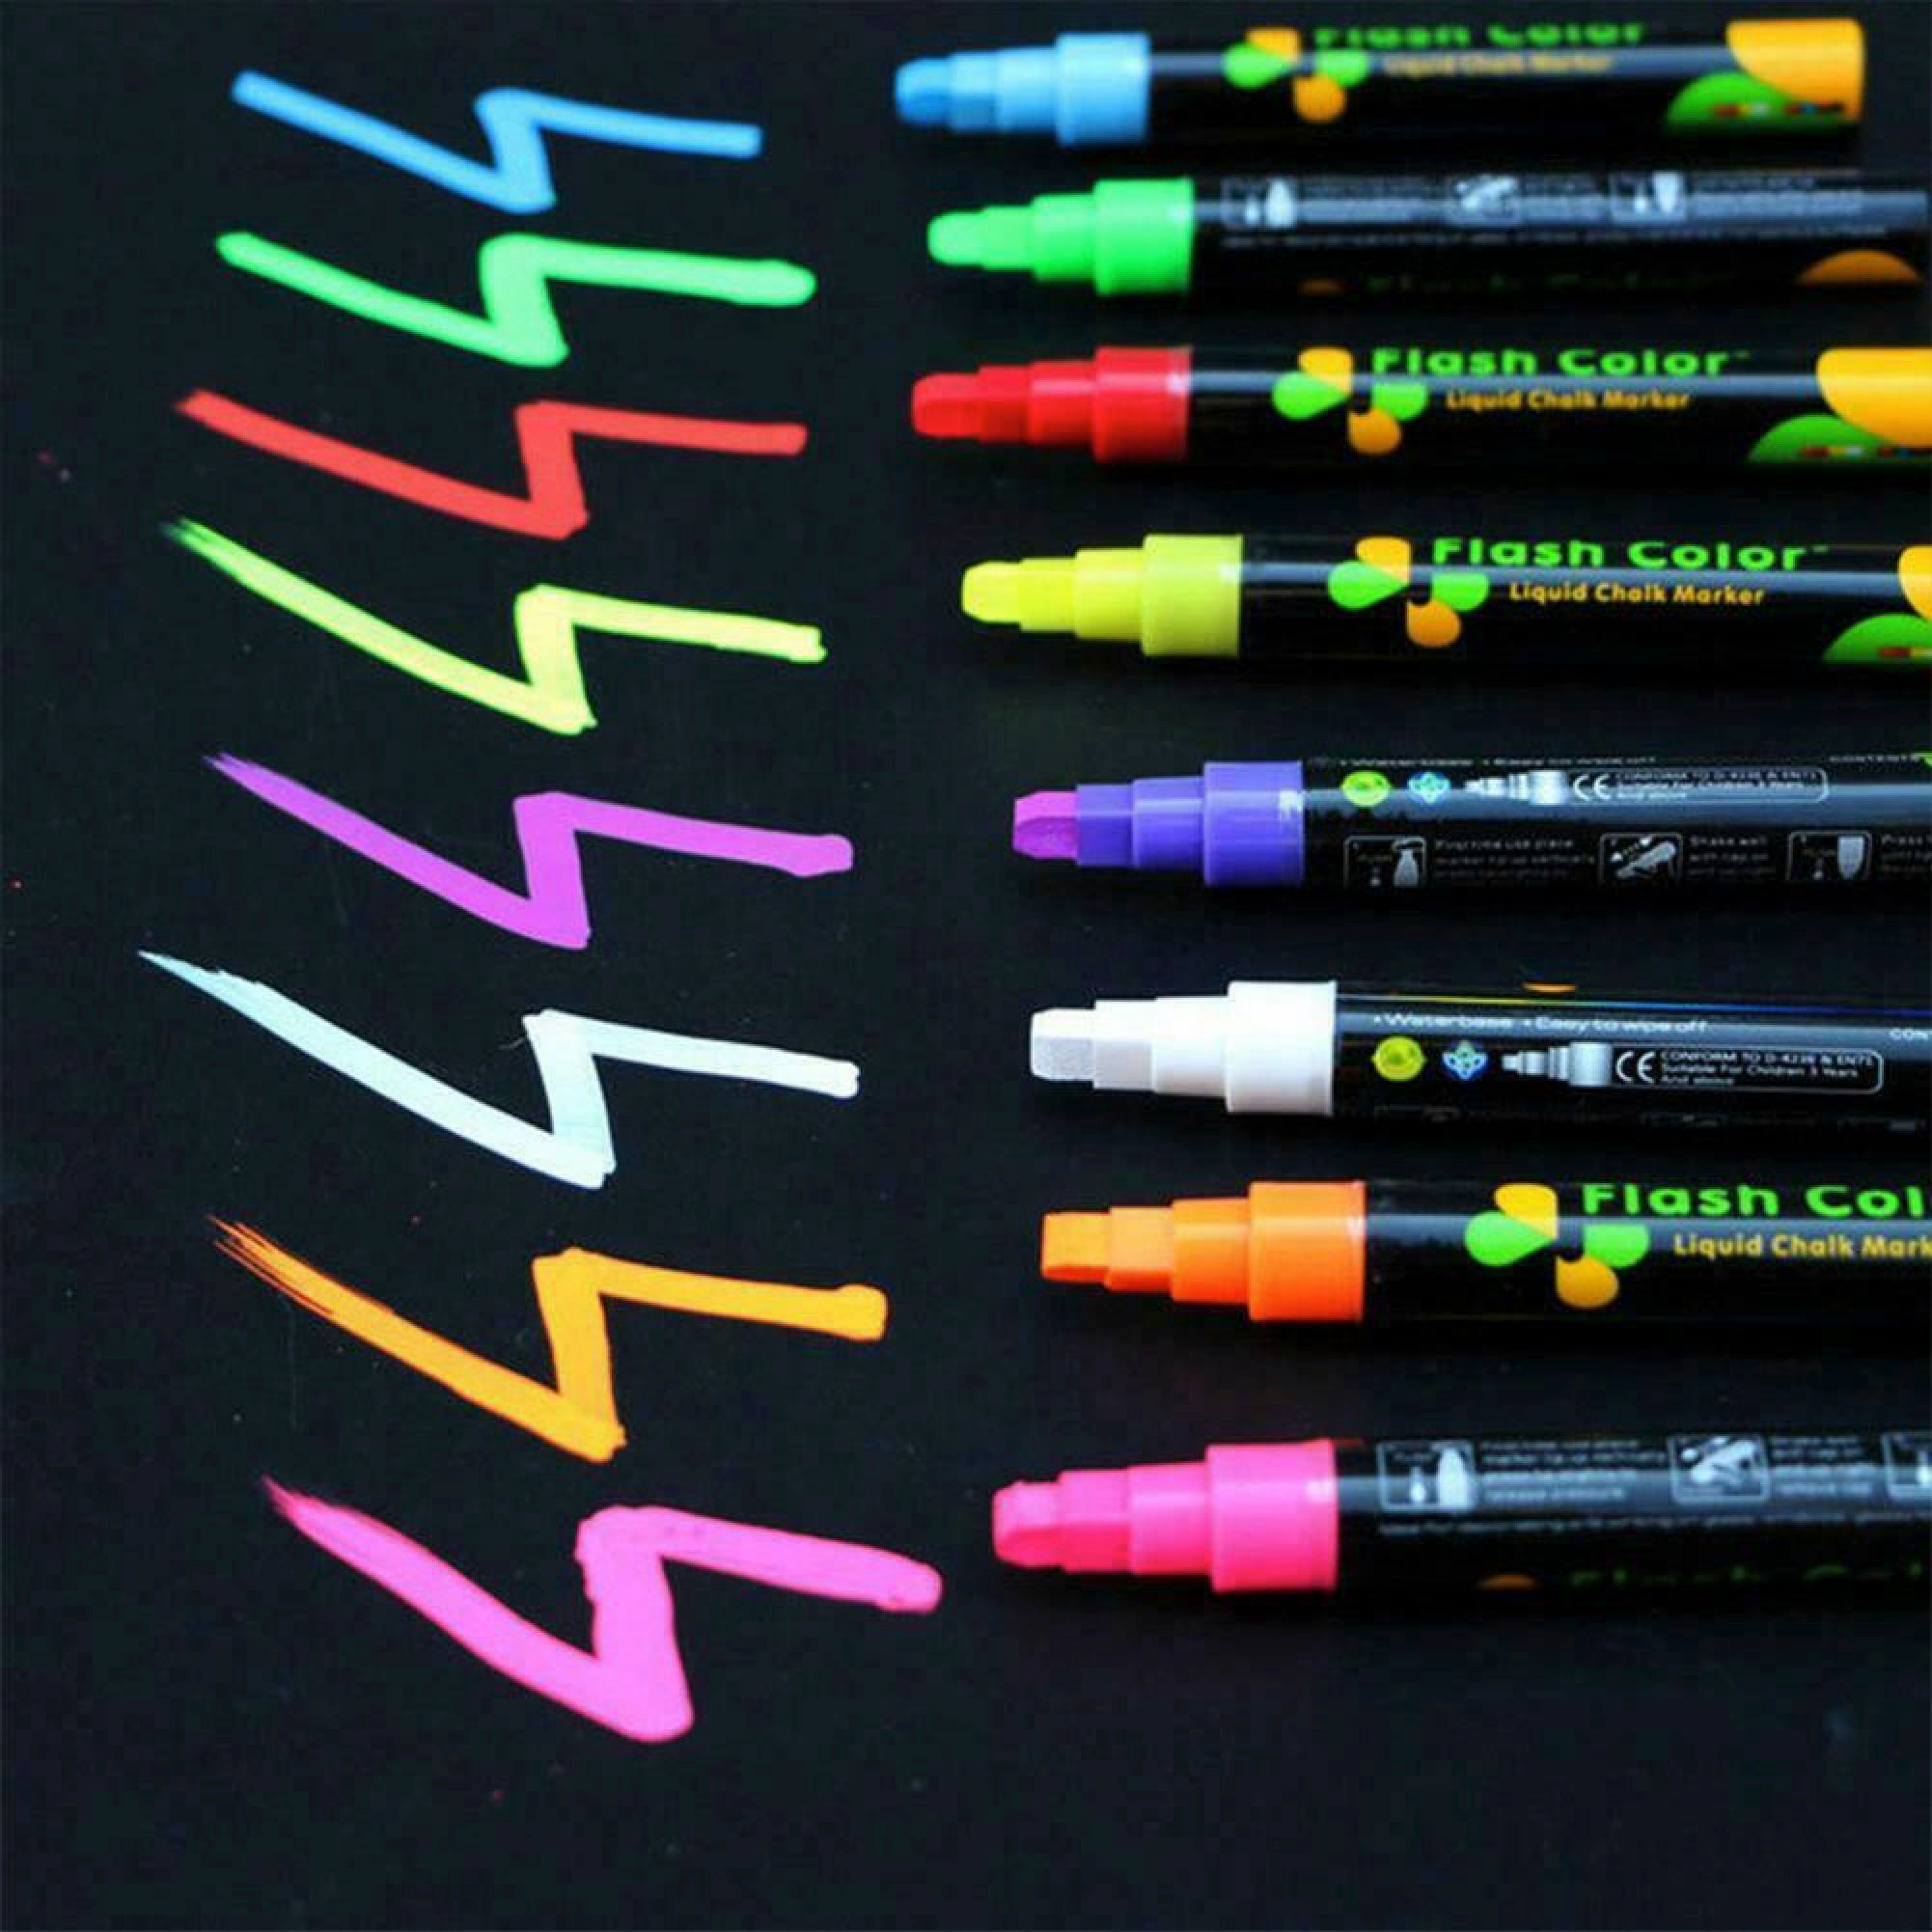 Promotional Gift our Liquid chalk marker with imprint options. PC